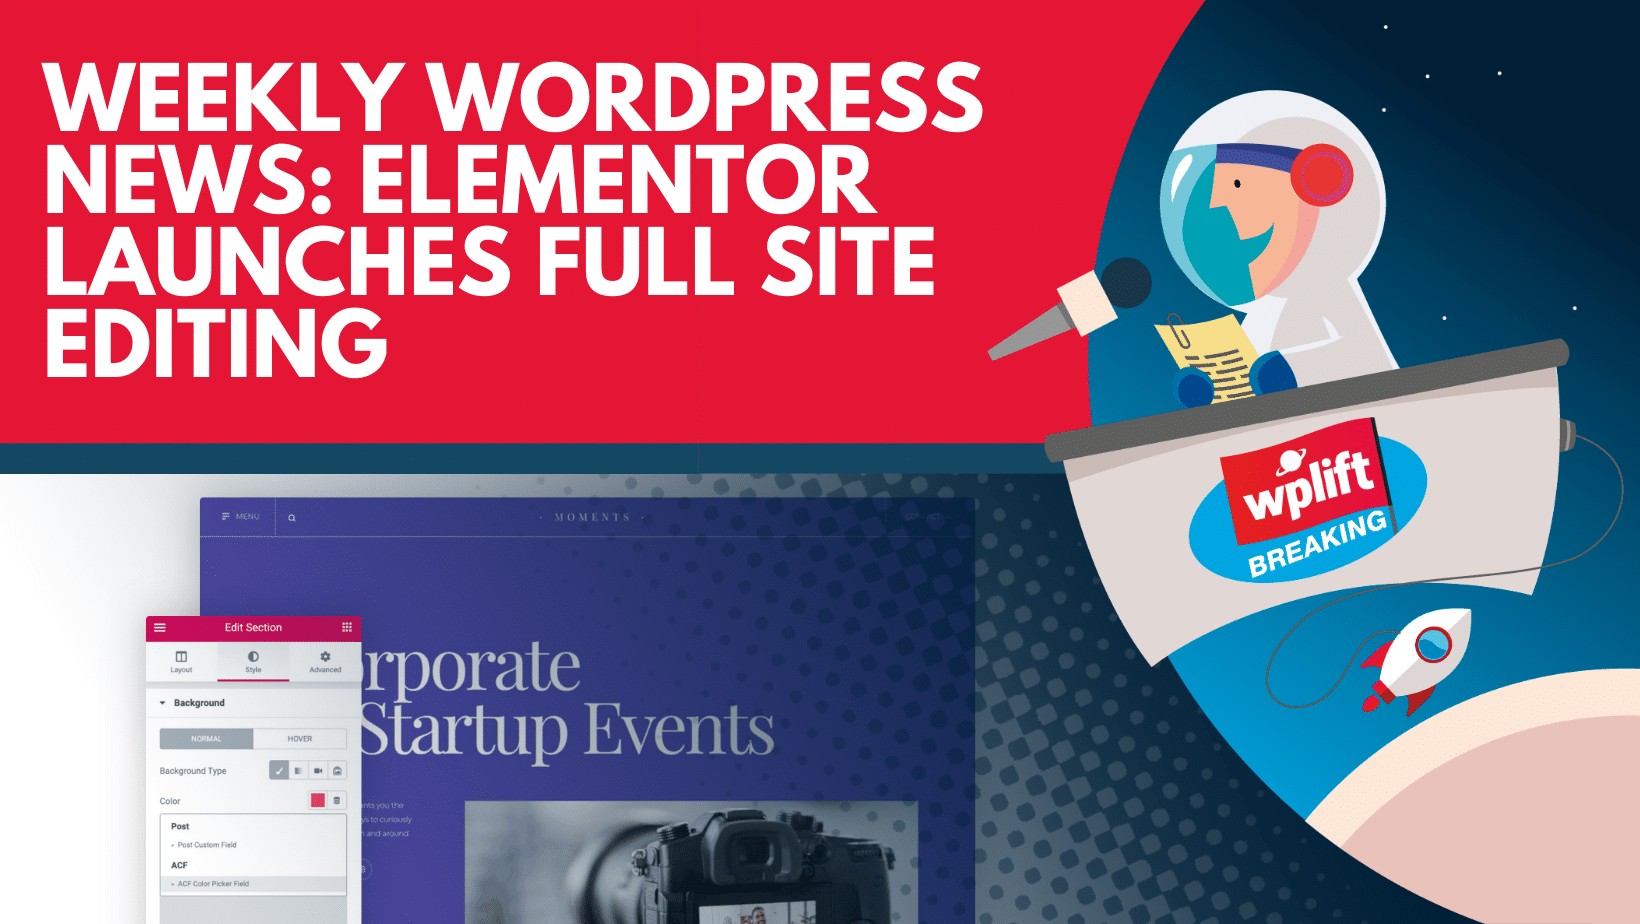 Weekly WordPress News: Elementor Launches Full Site Editing (Better Theme Building)